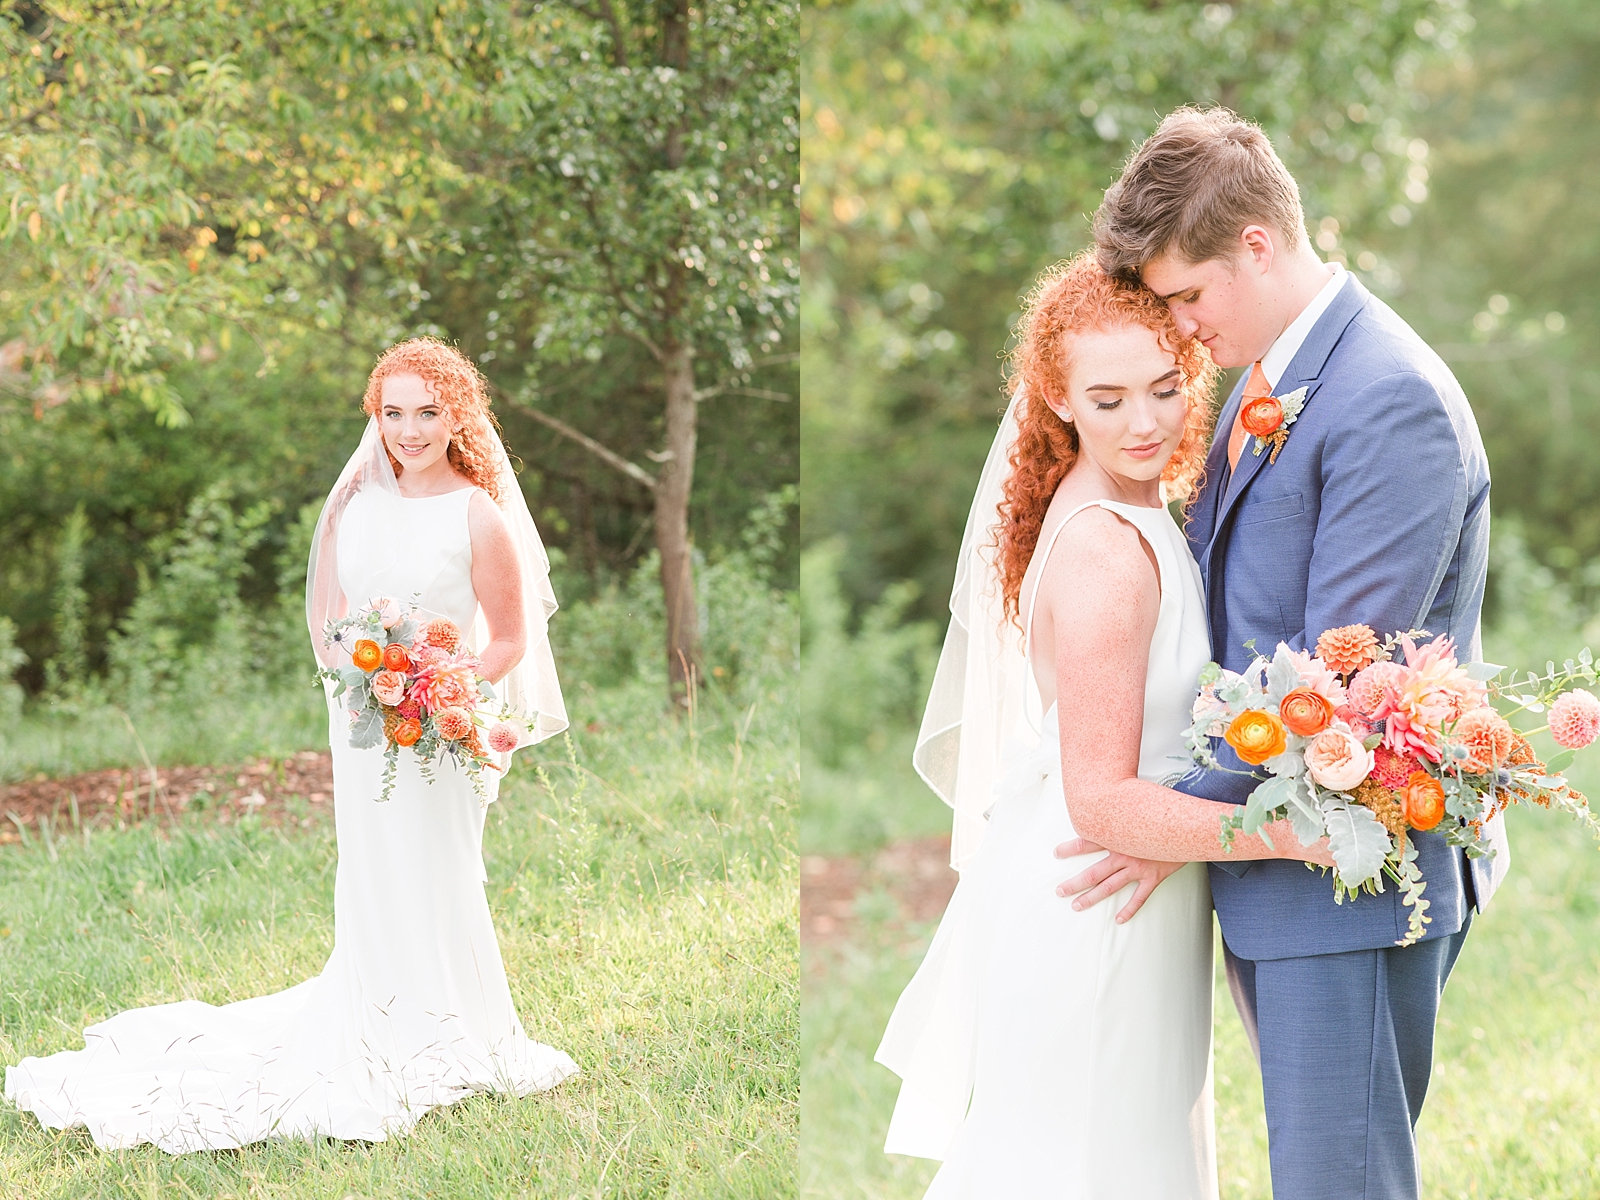 Chestnut Ridge Wedding carlis bridal portrait with bouquet and romantic bride and groom looking down Photos